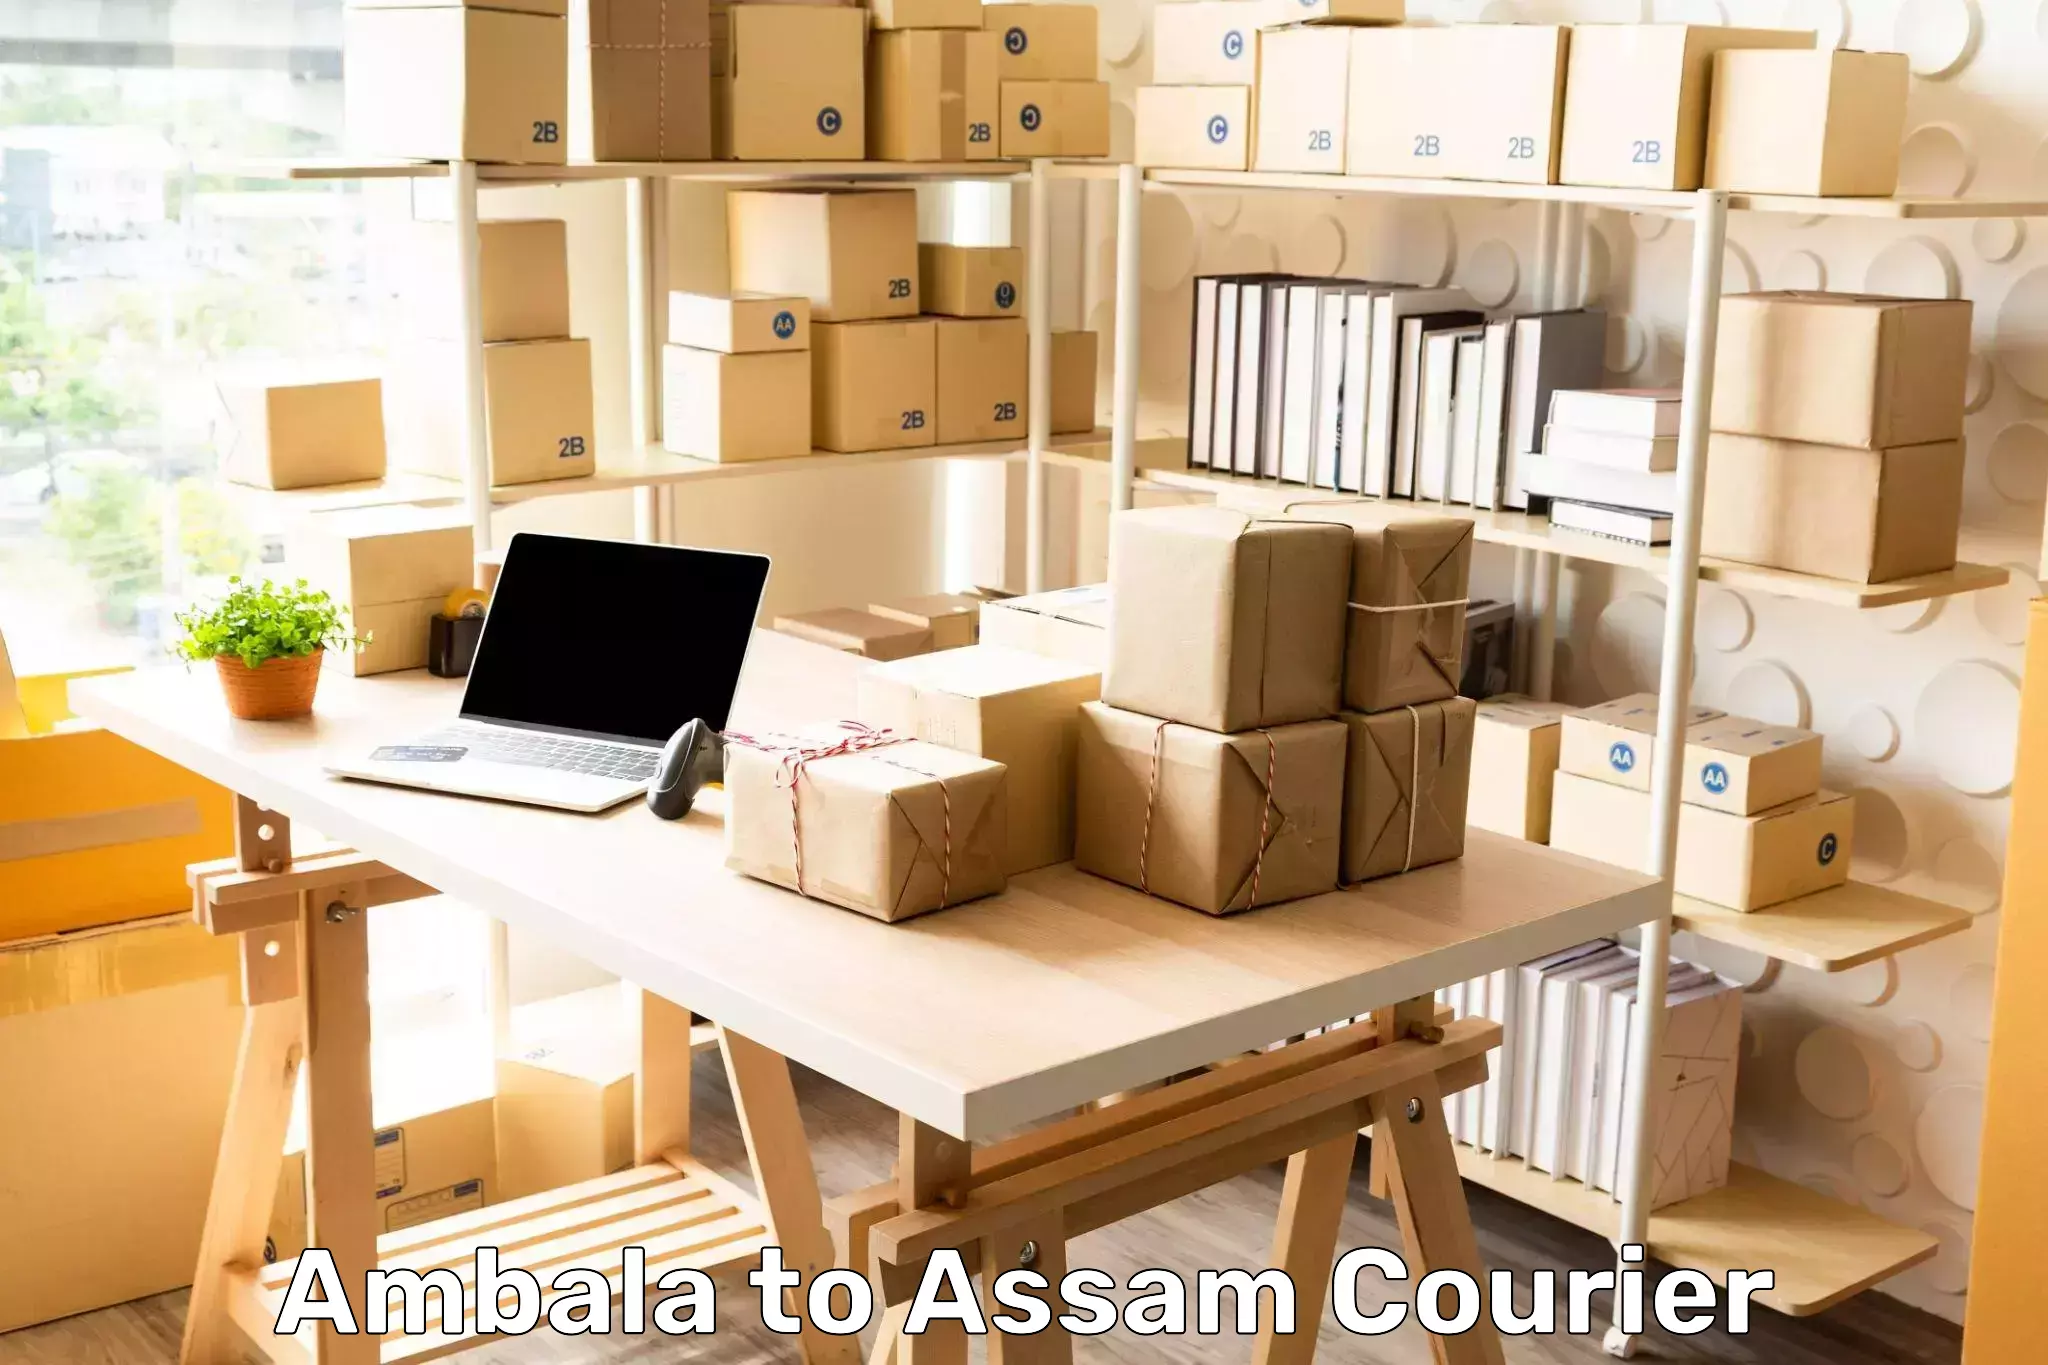 Same-day delivery solutions Ambala to Assam